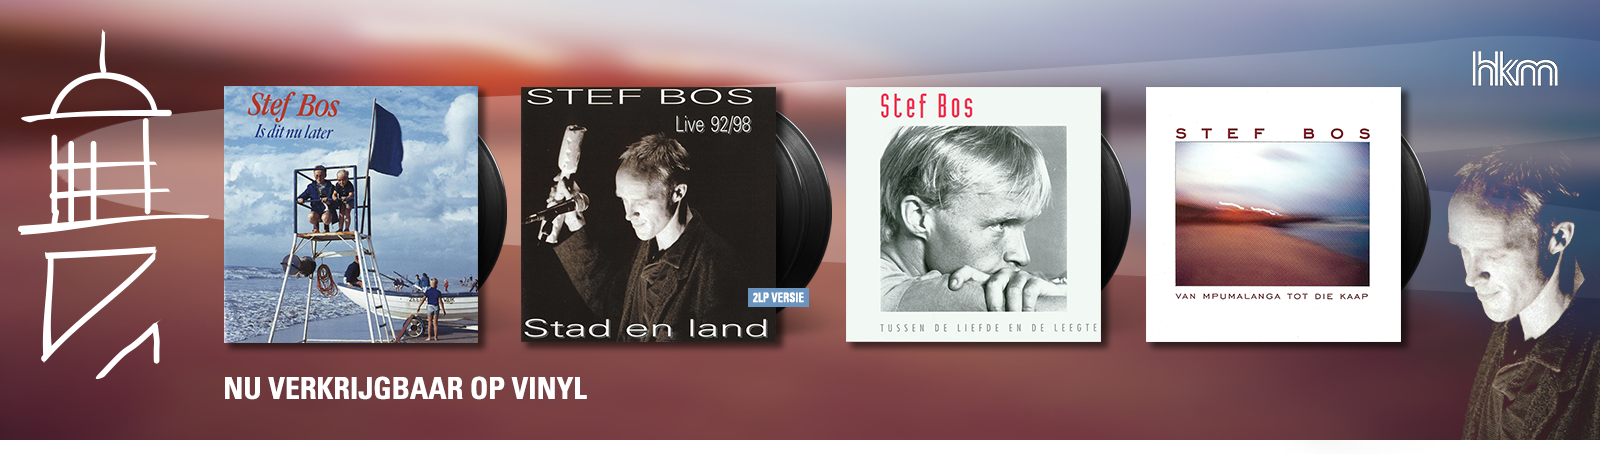 Banner-Stef Bos-catalogus-1600px